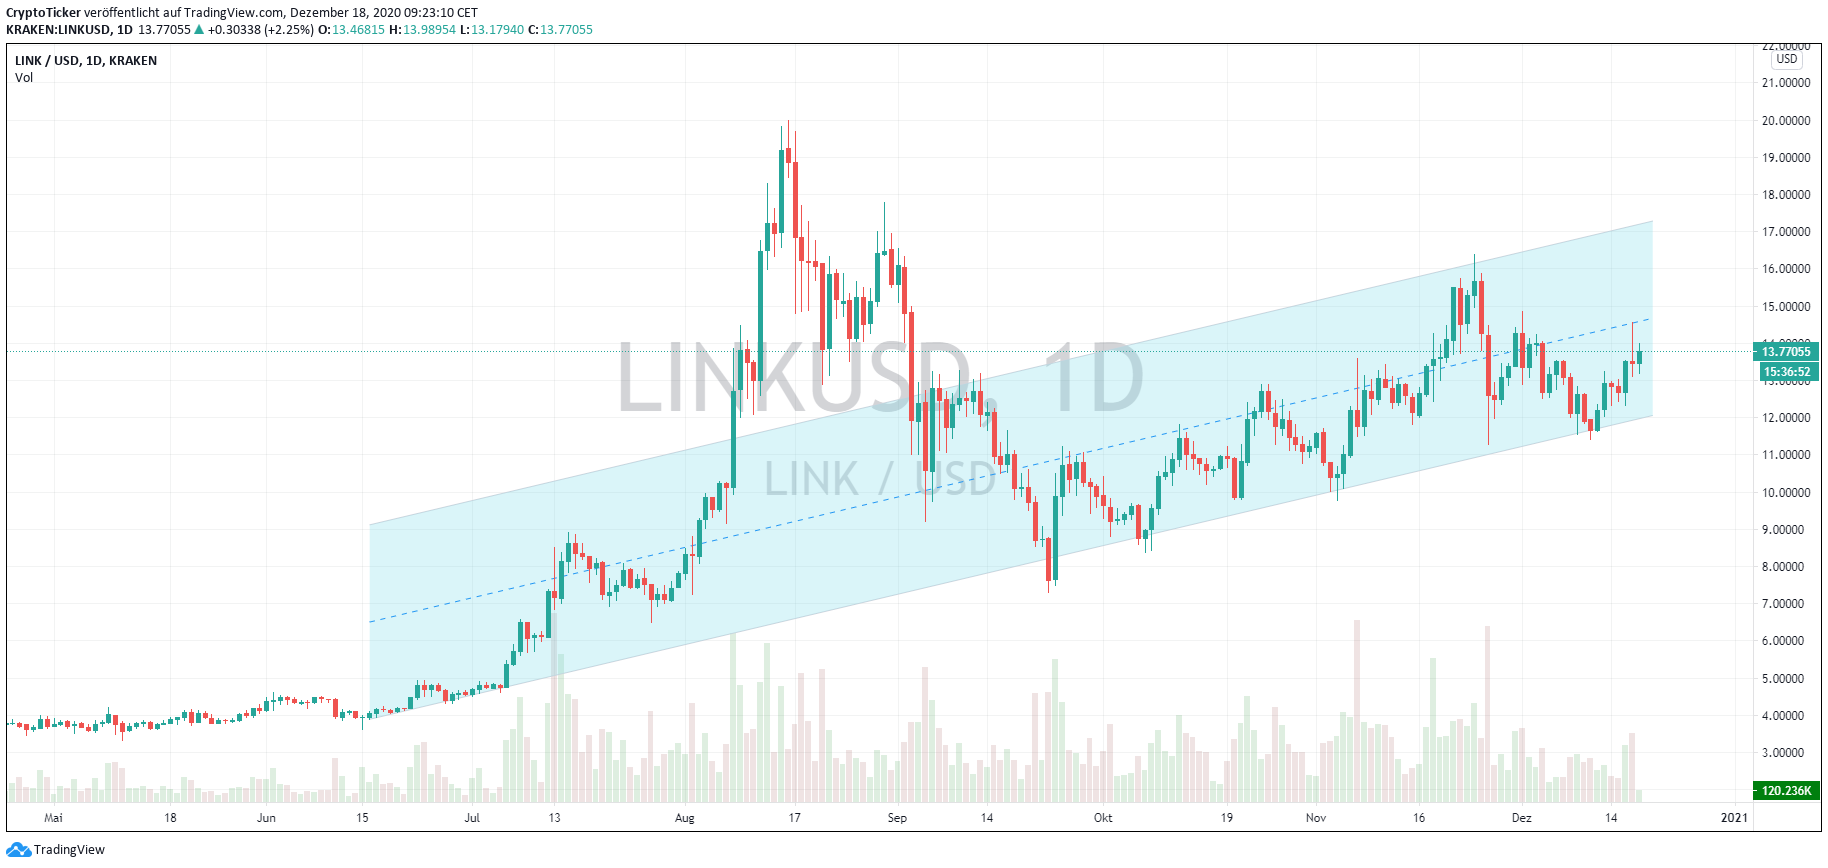 LINK/USD 1-Day chart – Uptrend channel continuation